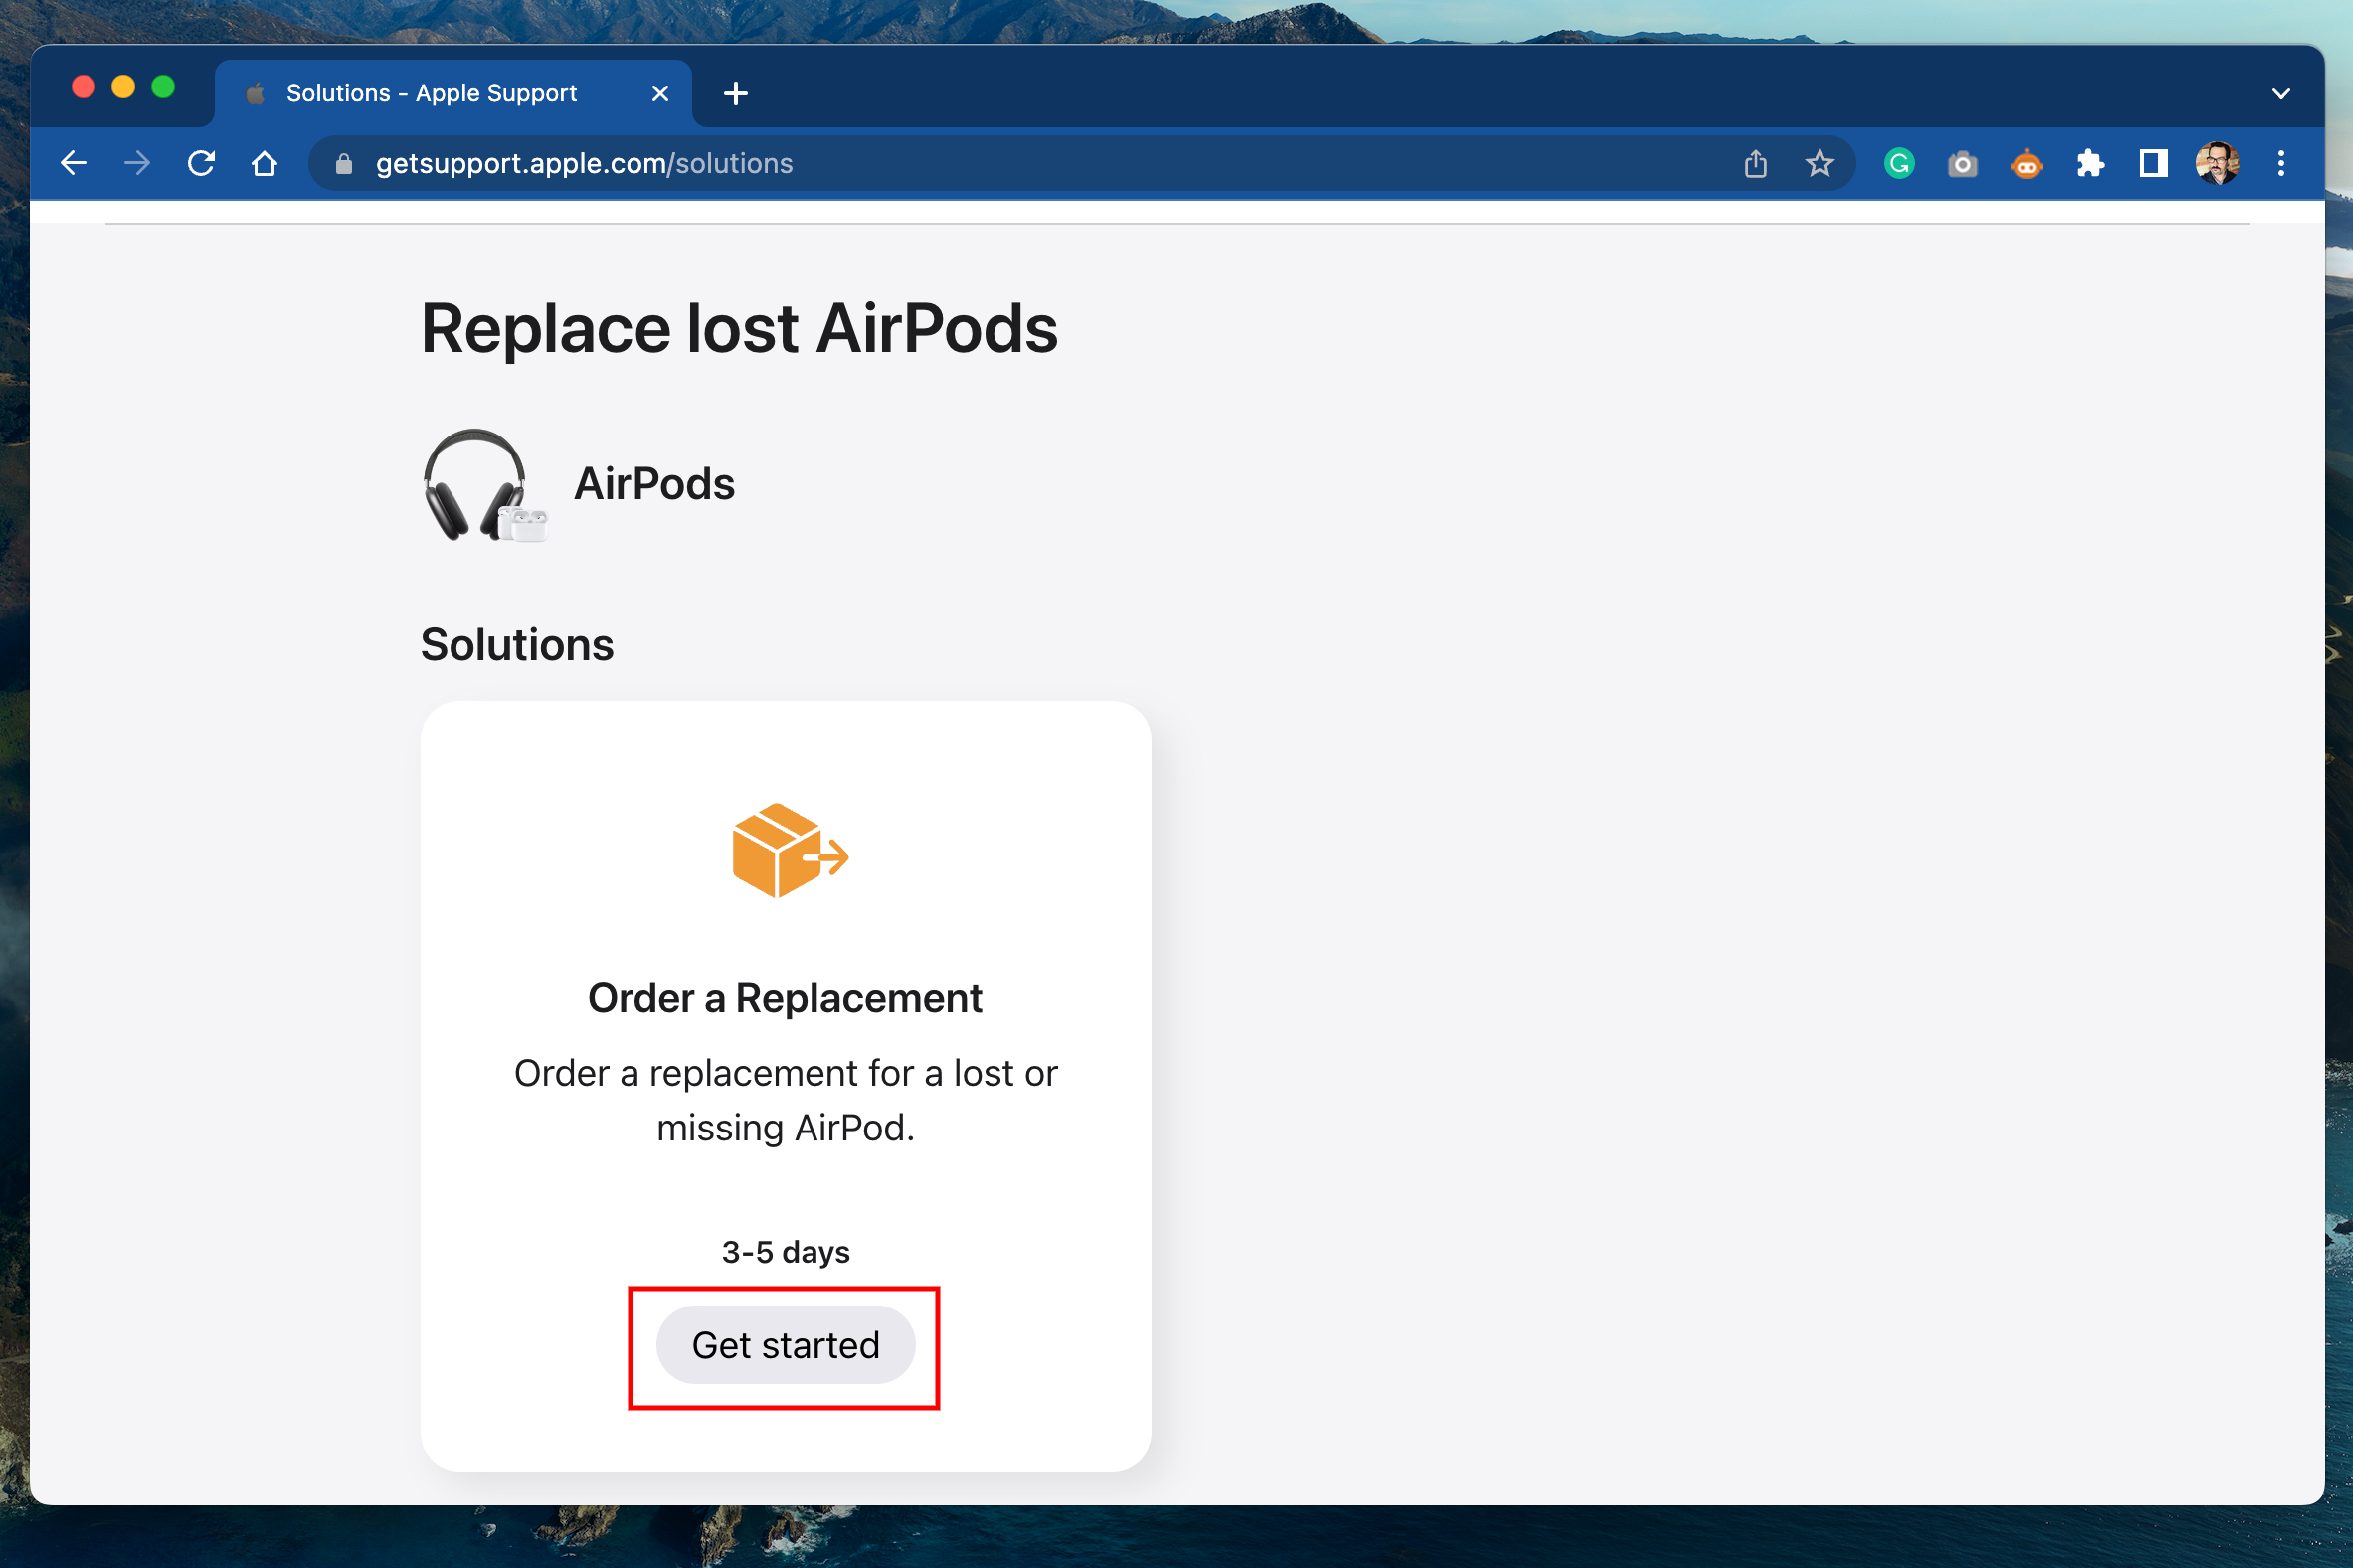 Steps to replace lost or missing AirPods - get started.